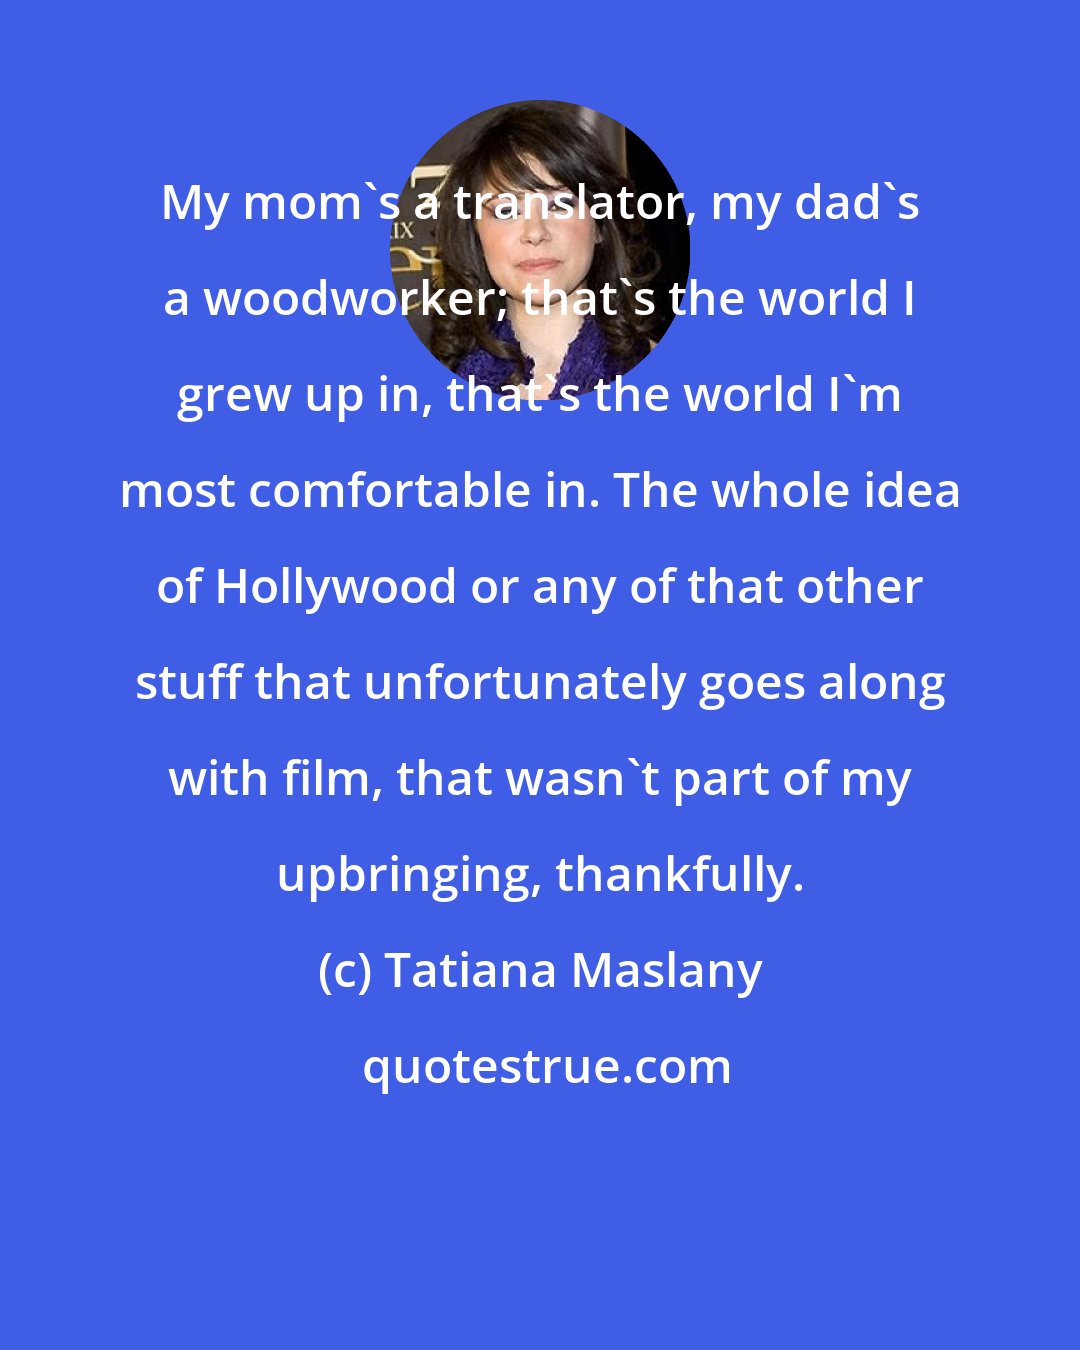 Tatiana Maslany: My mom's a translator, my dad's a woodworker; that's the world I grew up in, that's the world I'm most comfortable in. The whole idea of Hollywood or any of that other stuff that unfortunately goes along with film, that wasn't part of my upbringing, thankfully.